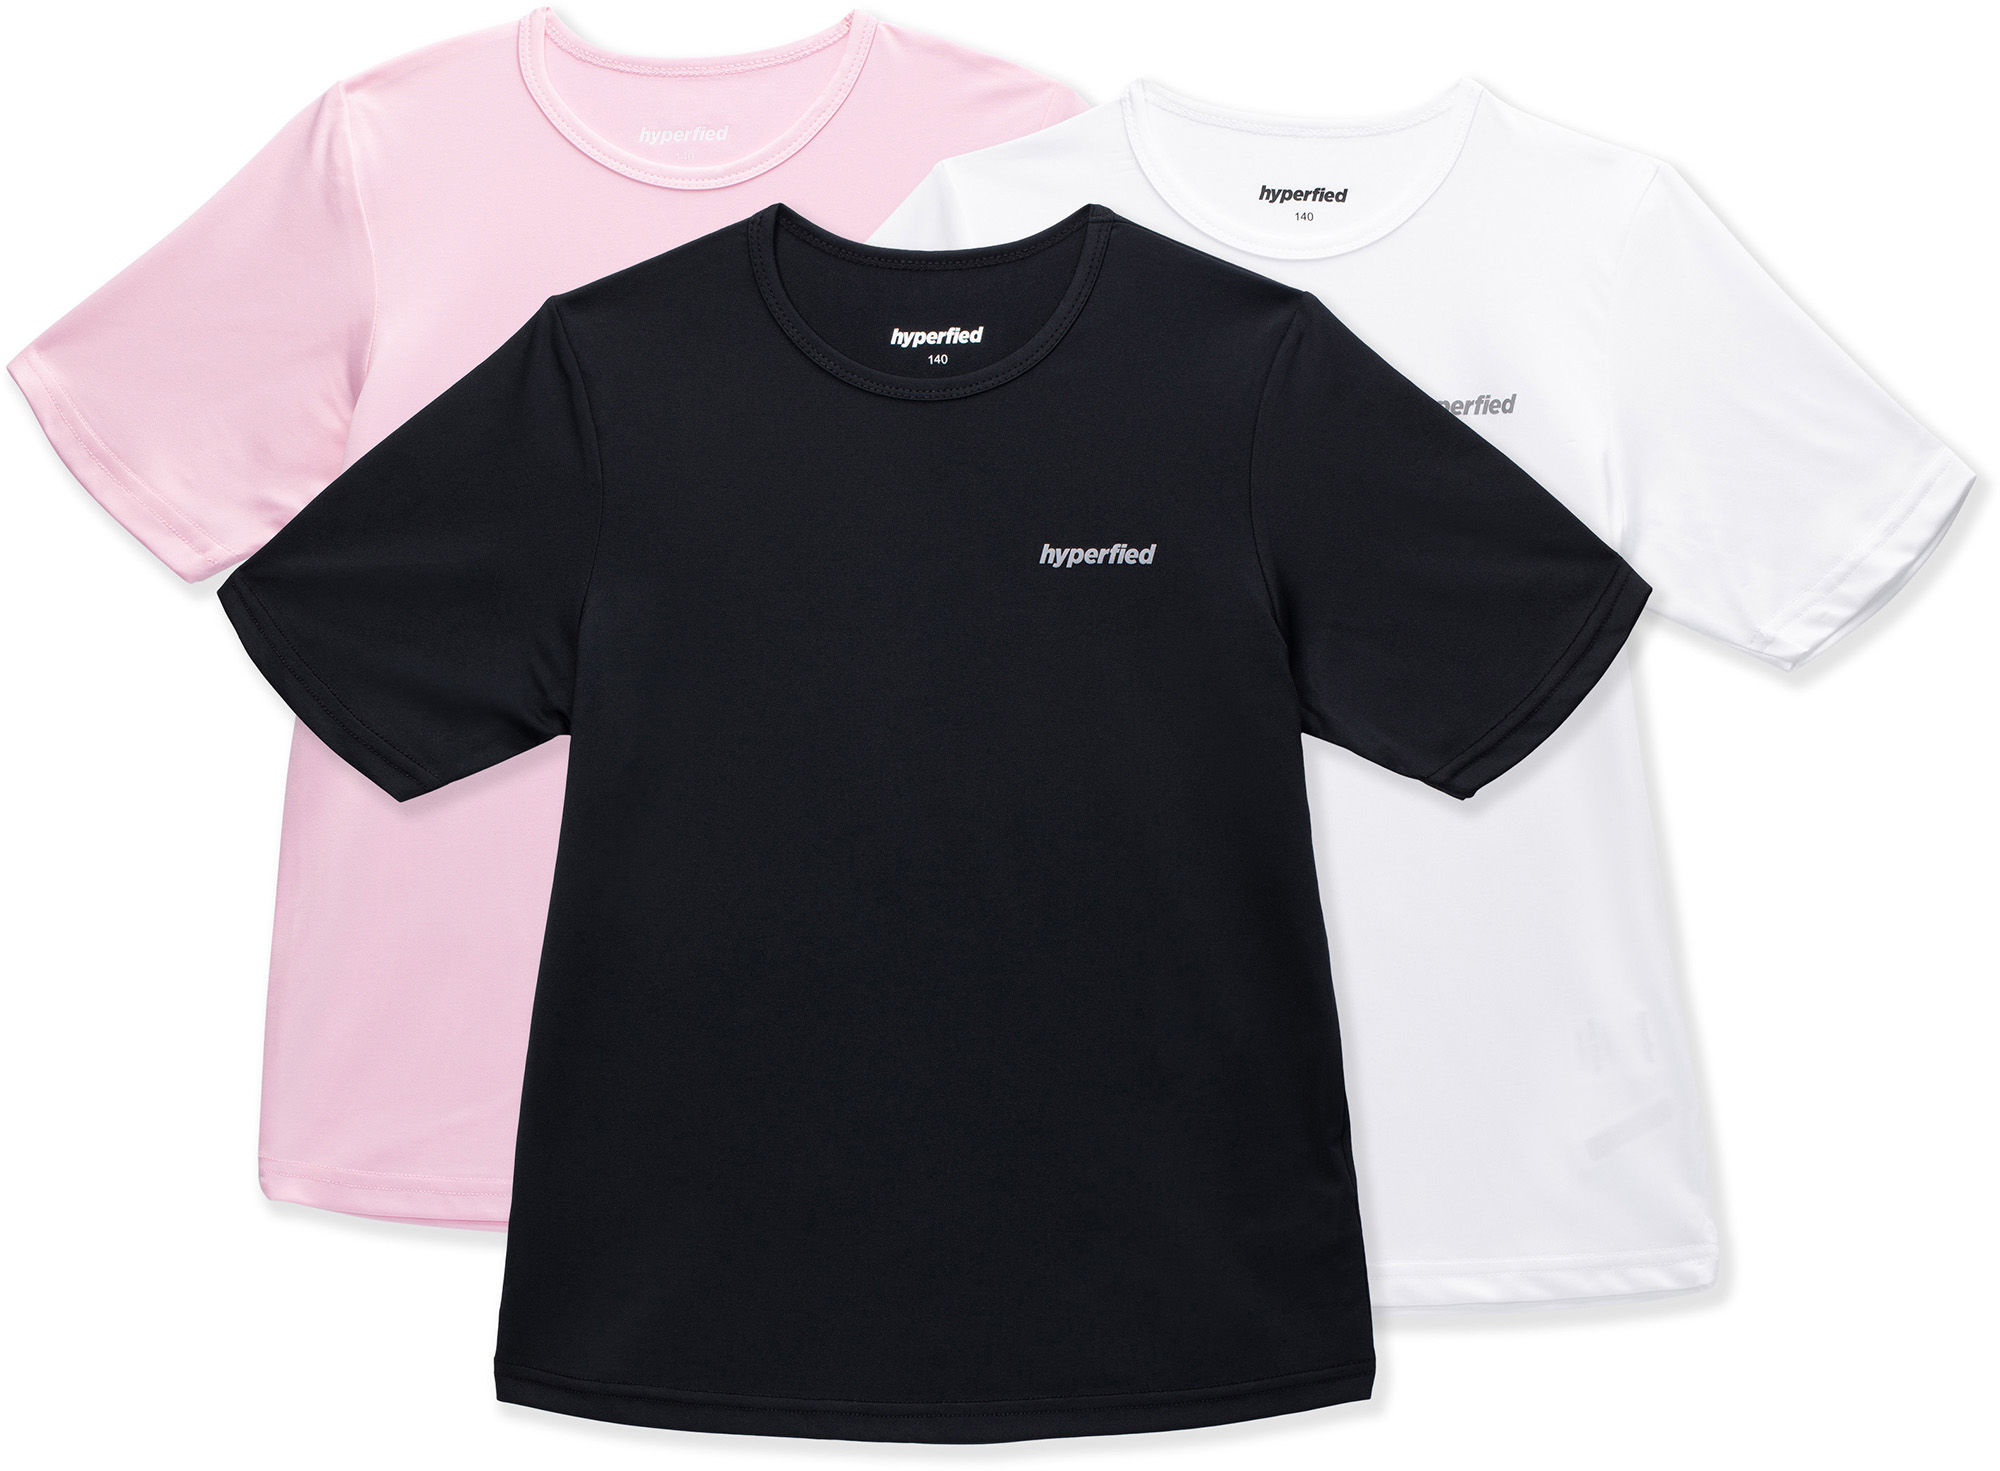 Hyperfied Wave T-Shirt 3-pack Black/White/Fairy Tale 160